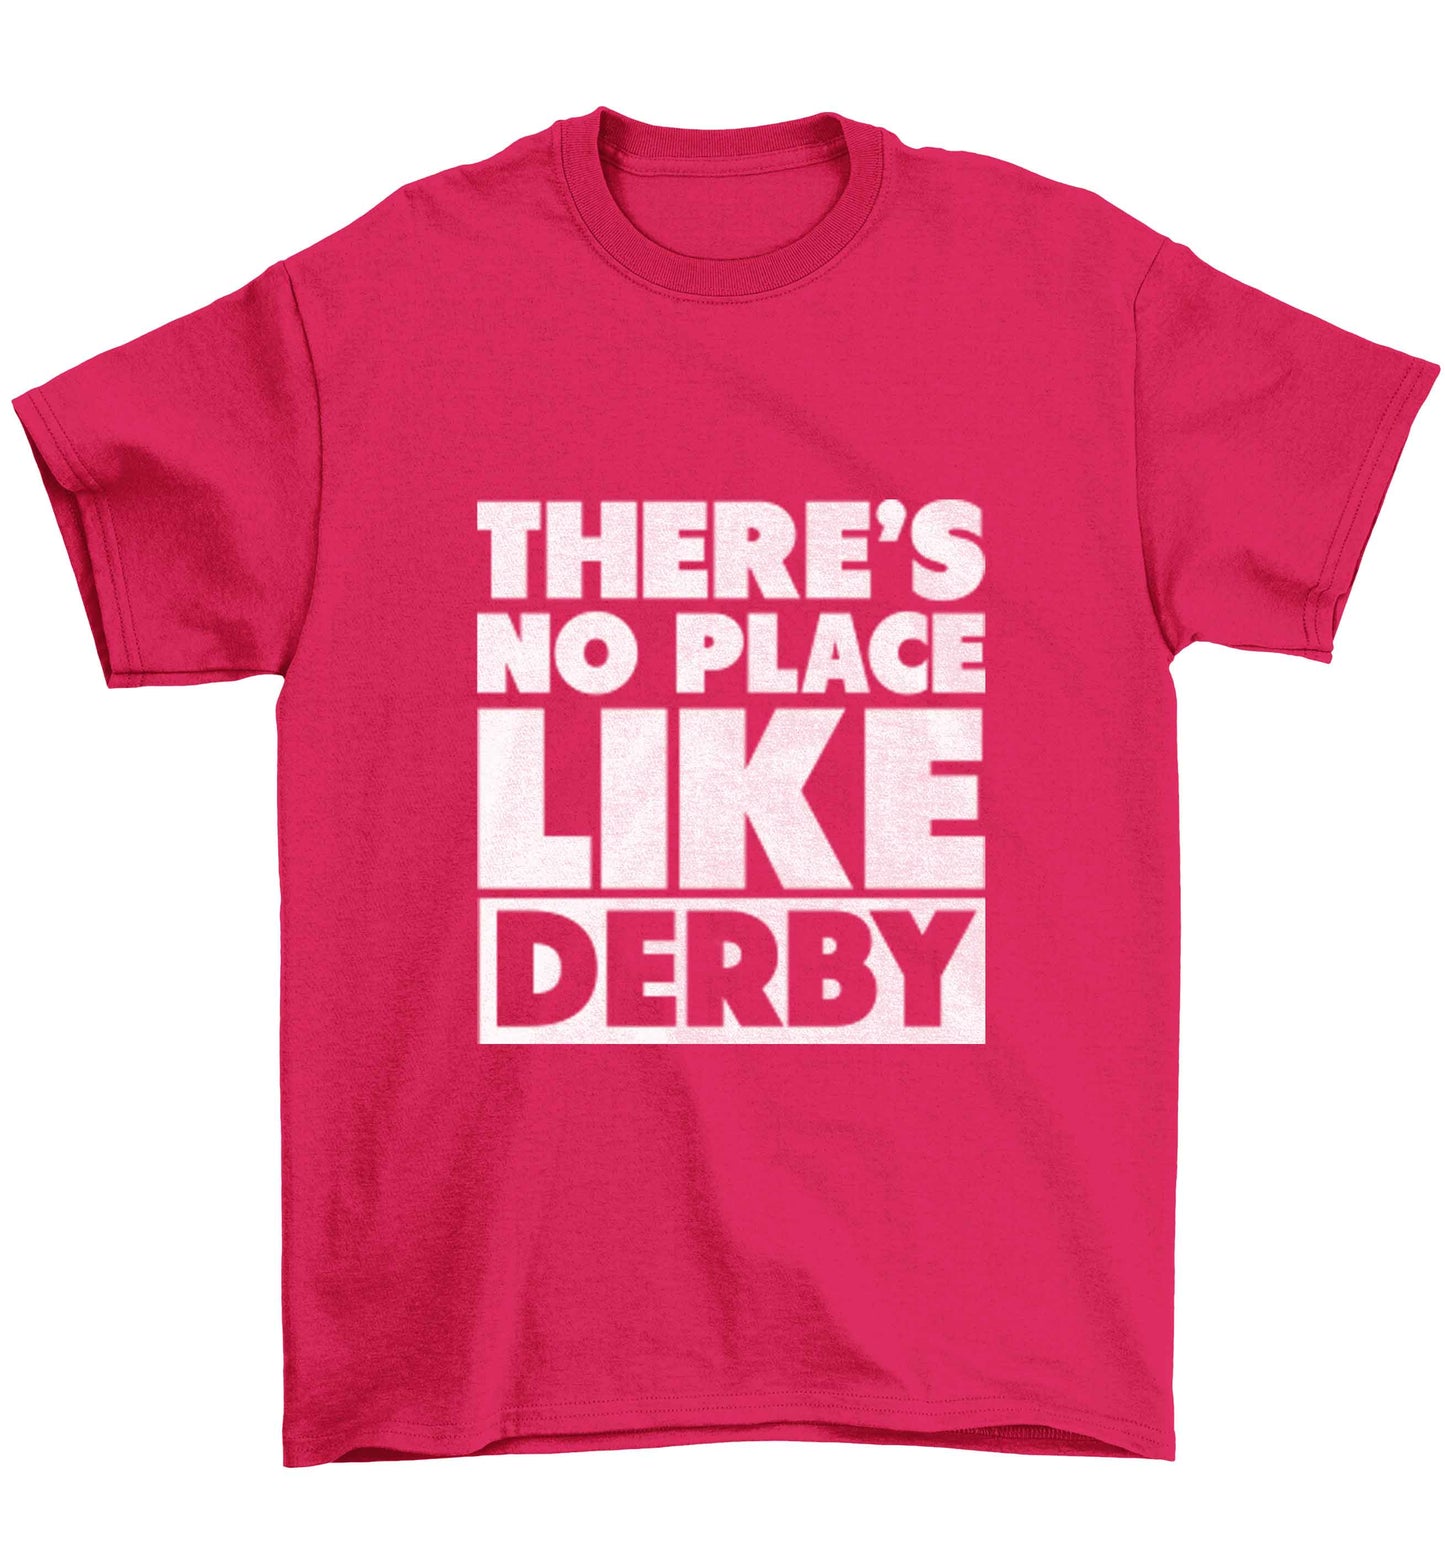 There's no place like Derby Children's pink Tshirt 12-13 Years